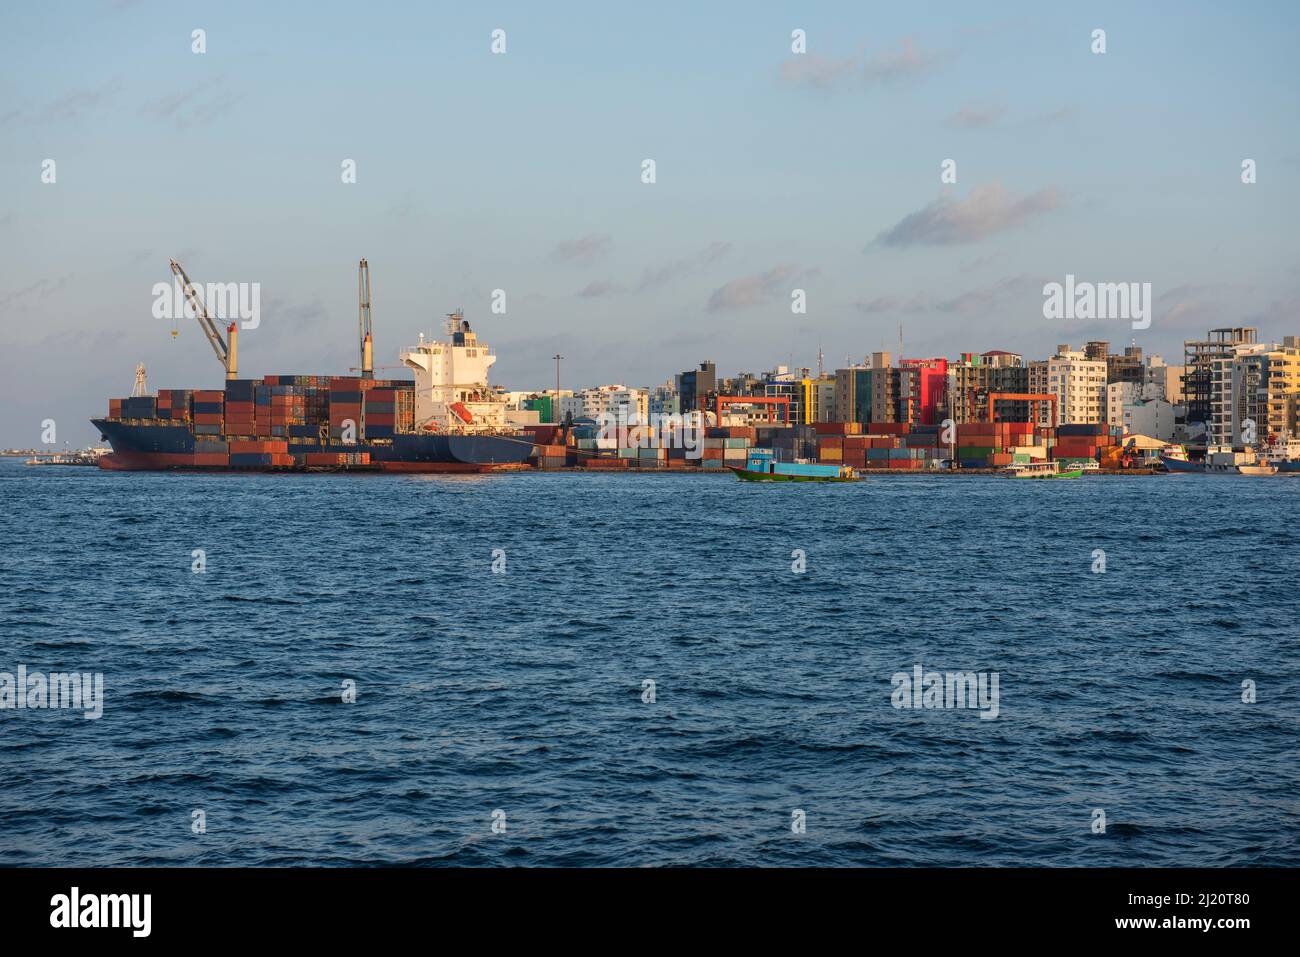 Large container ship moored in commercial industrial shipping port on island city in open ocean Stock Photo